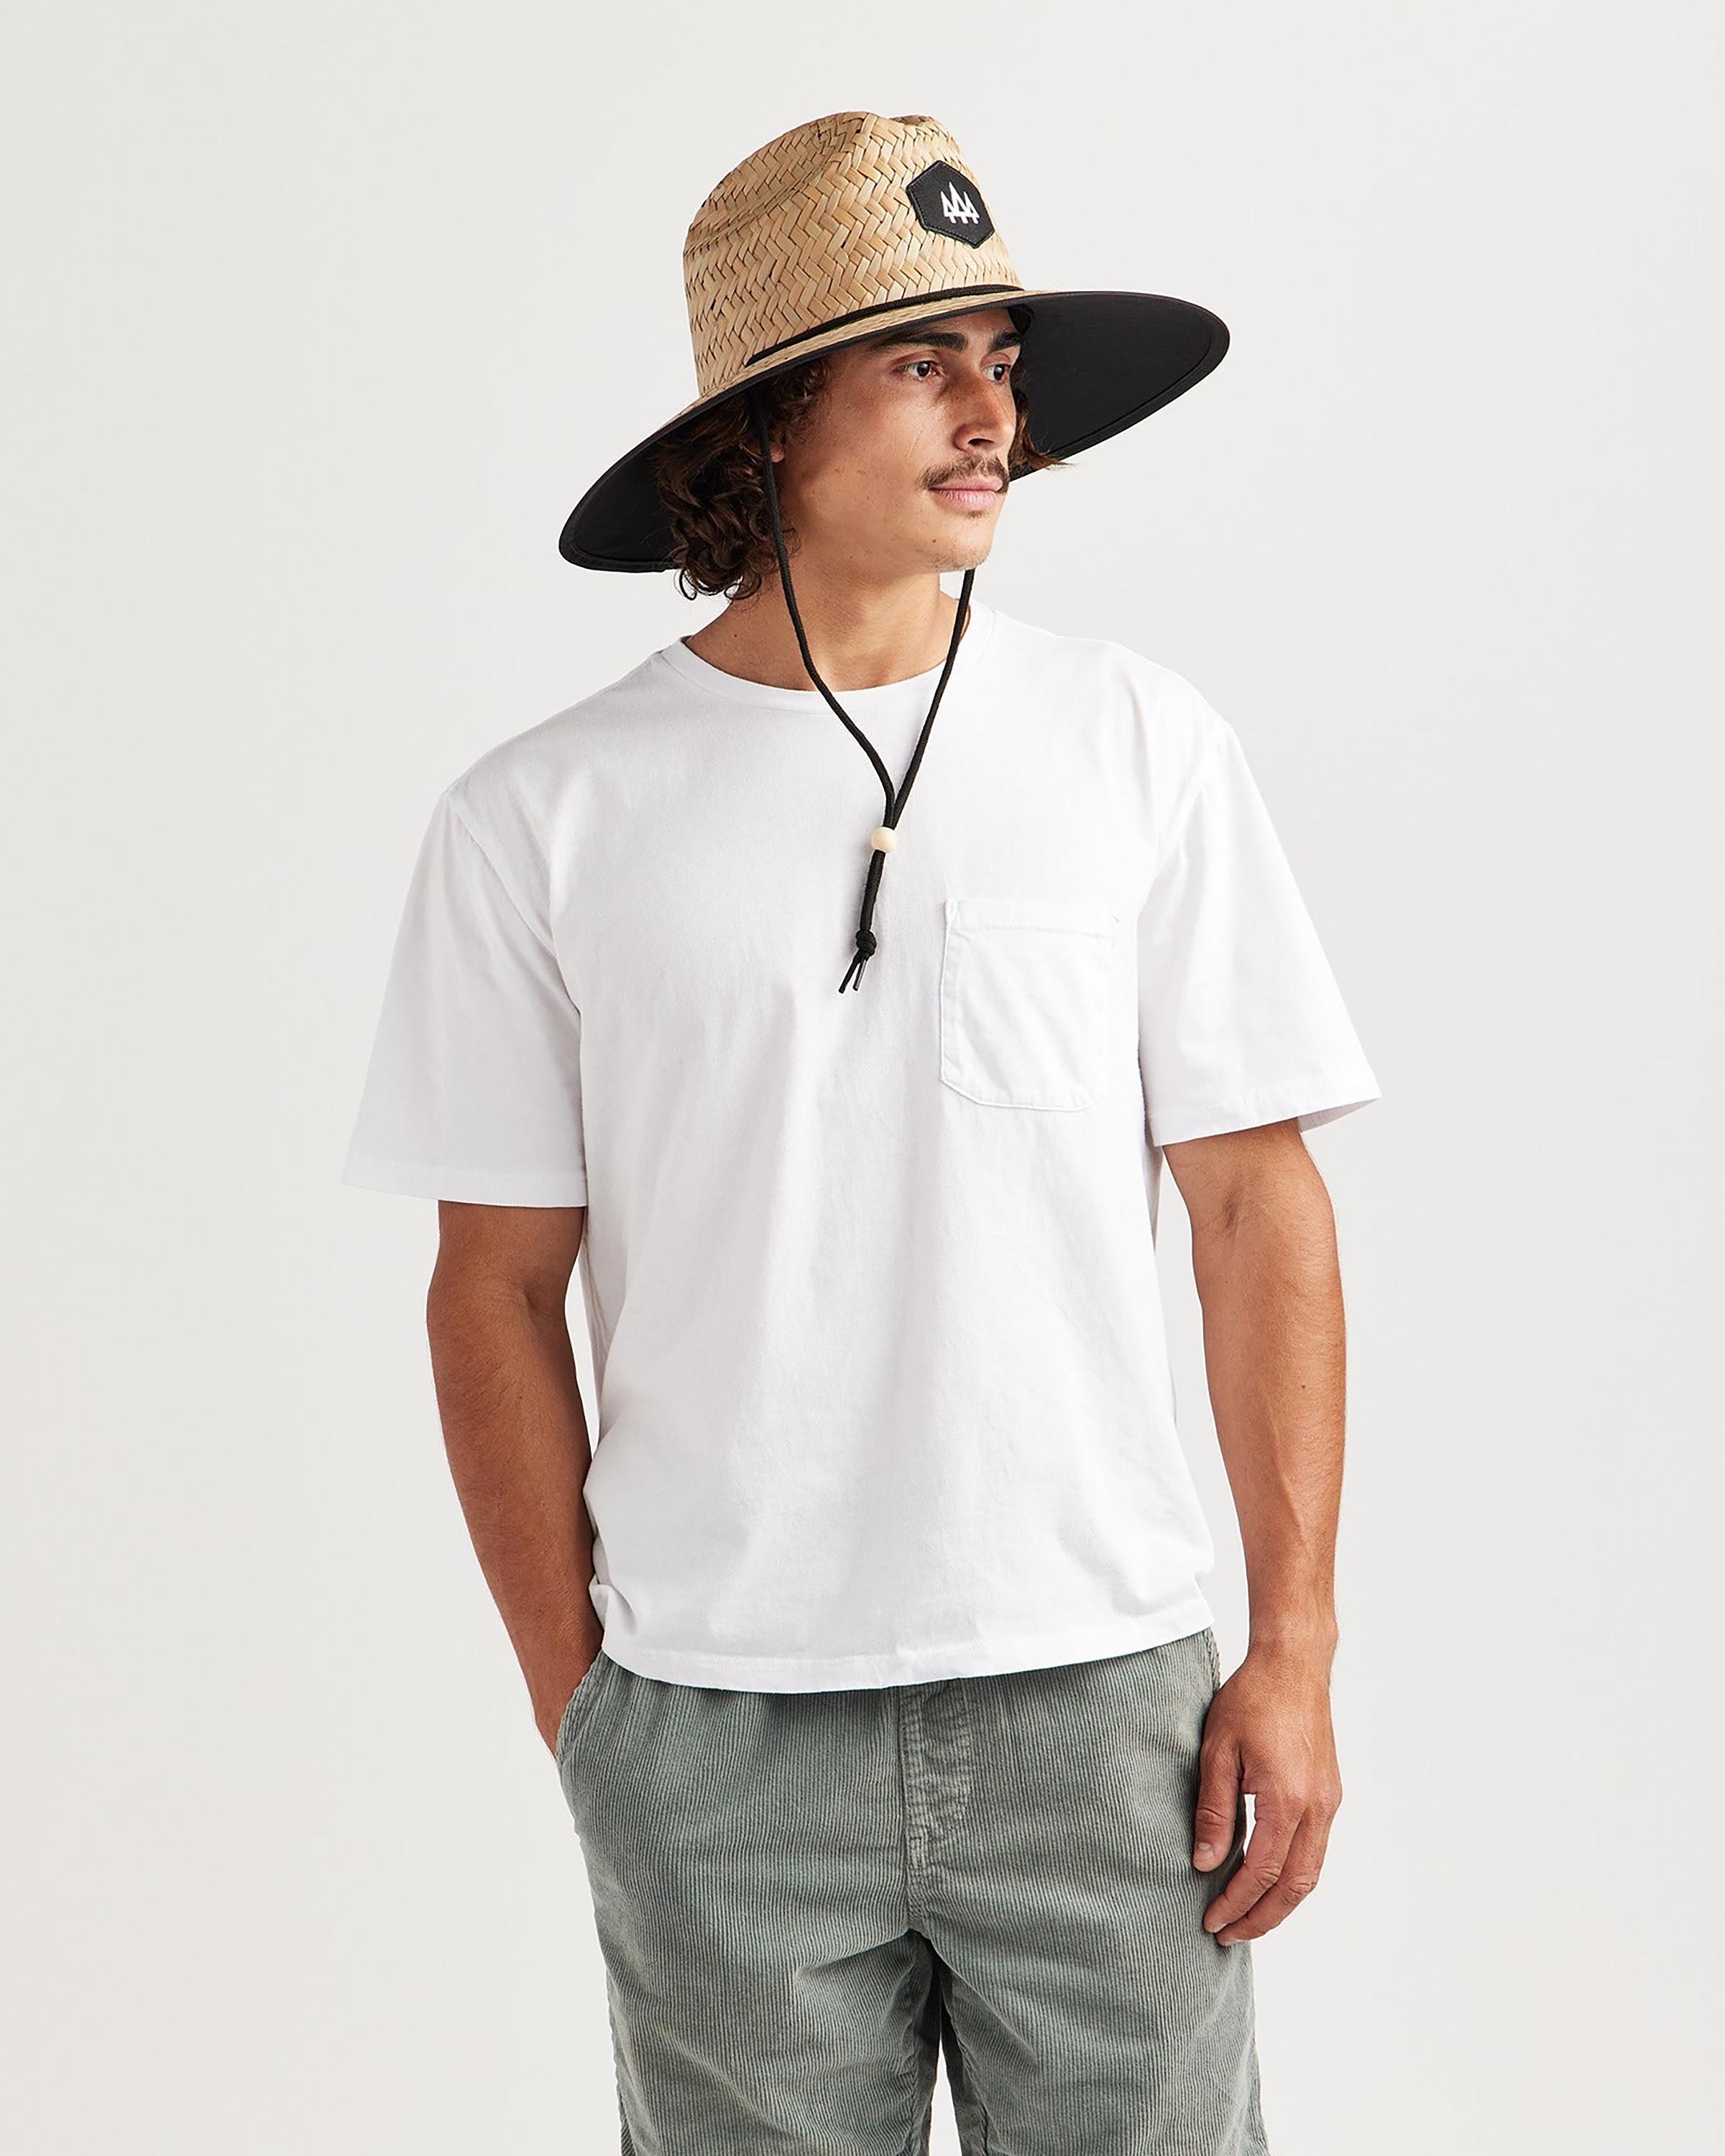 Hemlock male model looking right wearing Blackout straw lifeguard hat with Black color